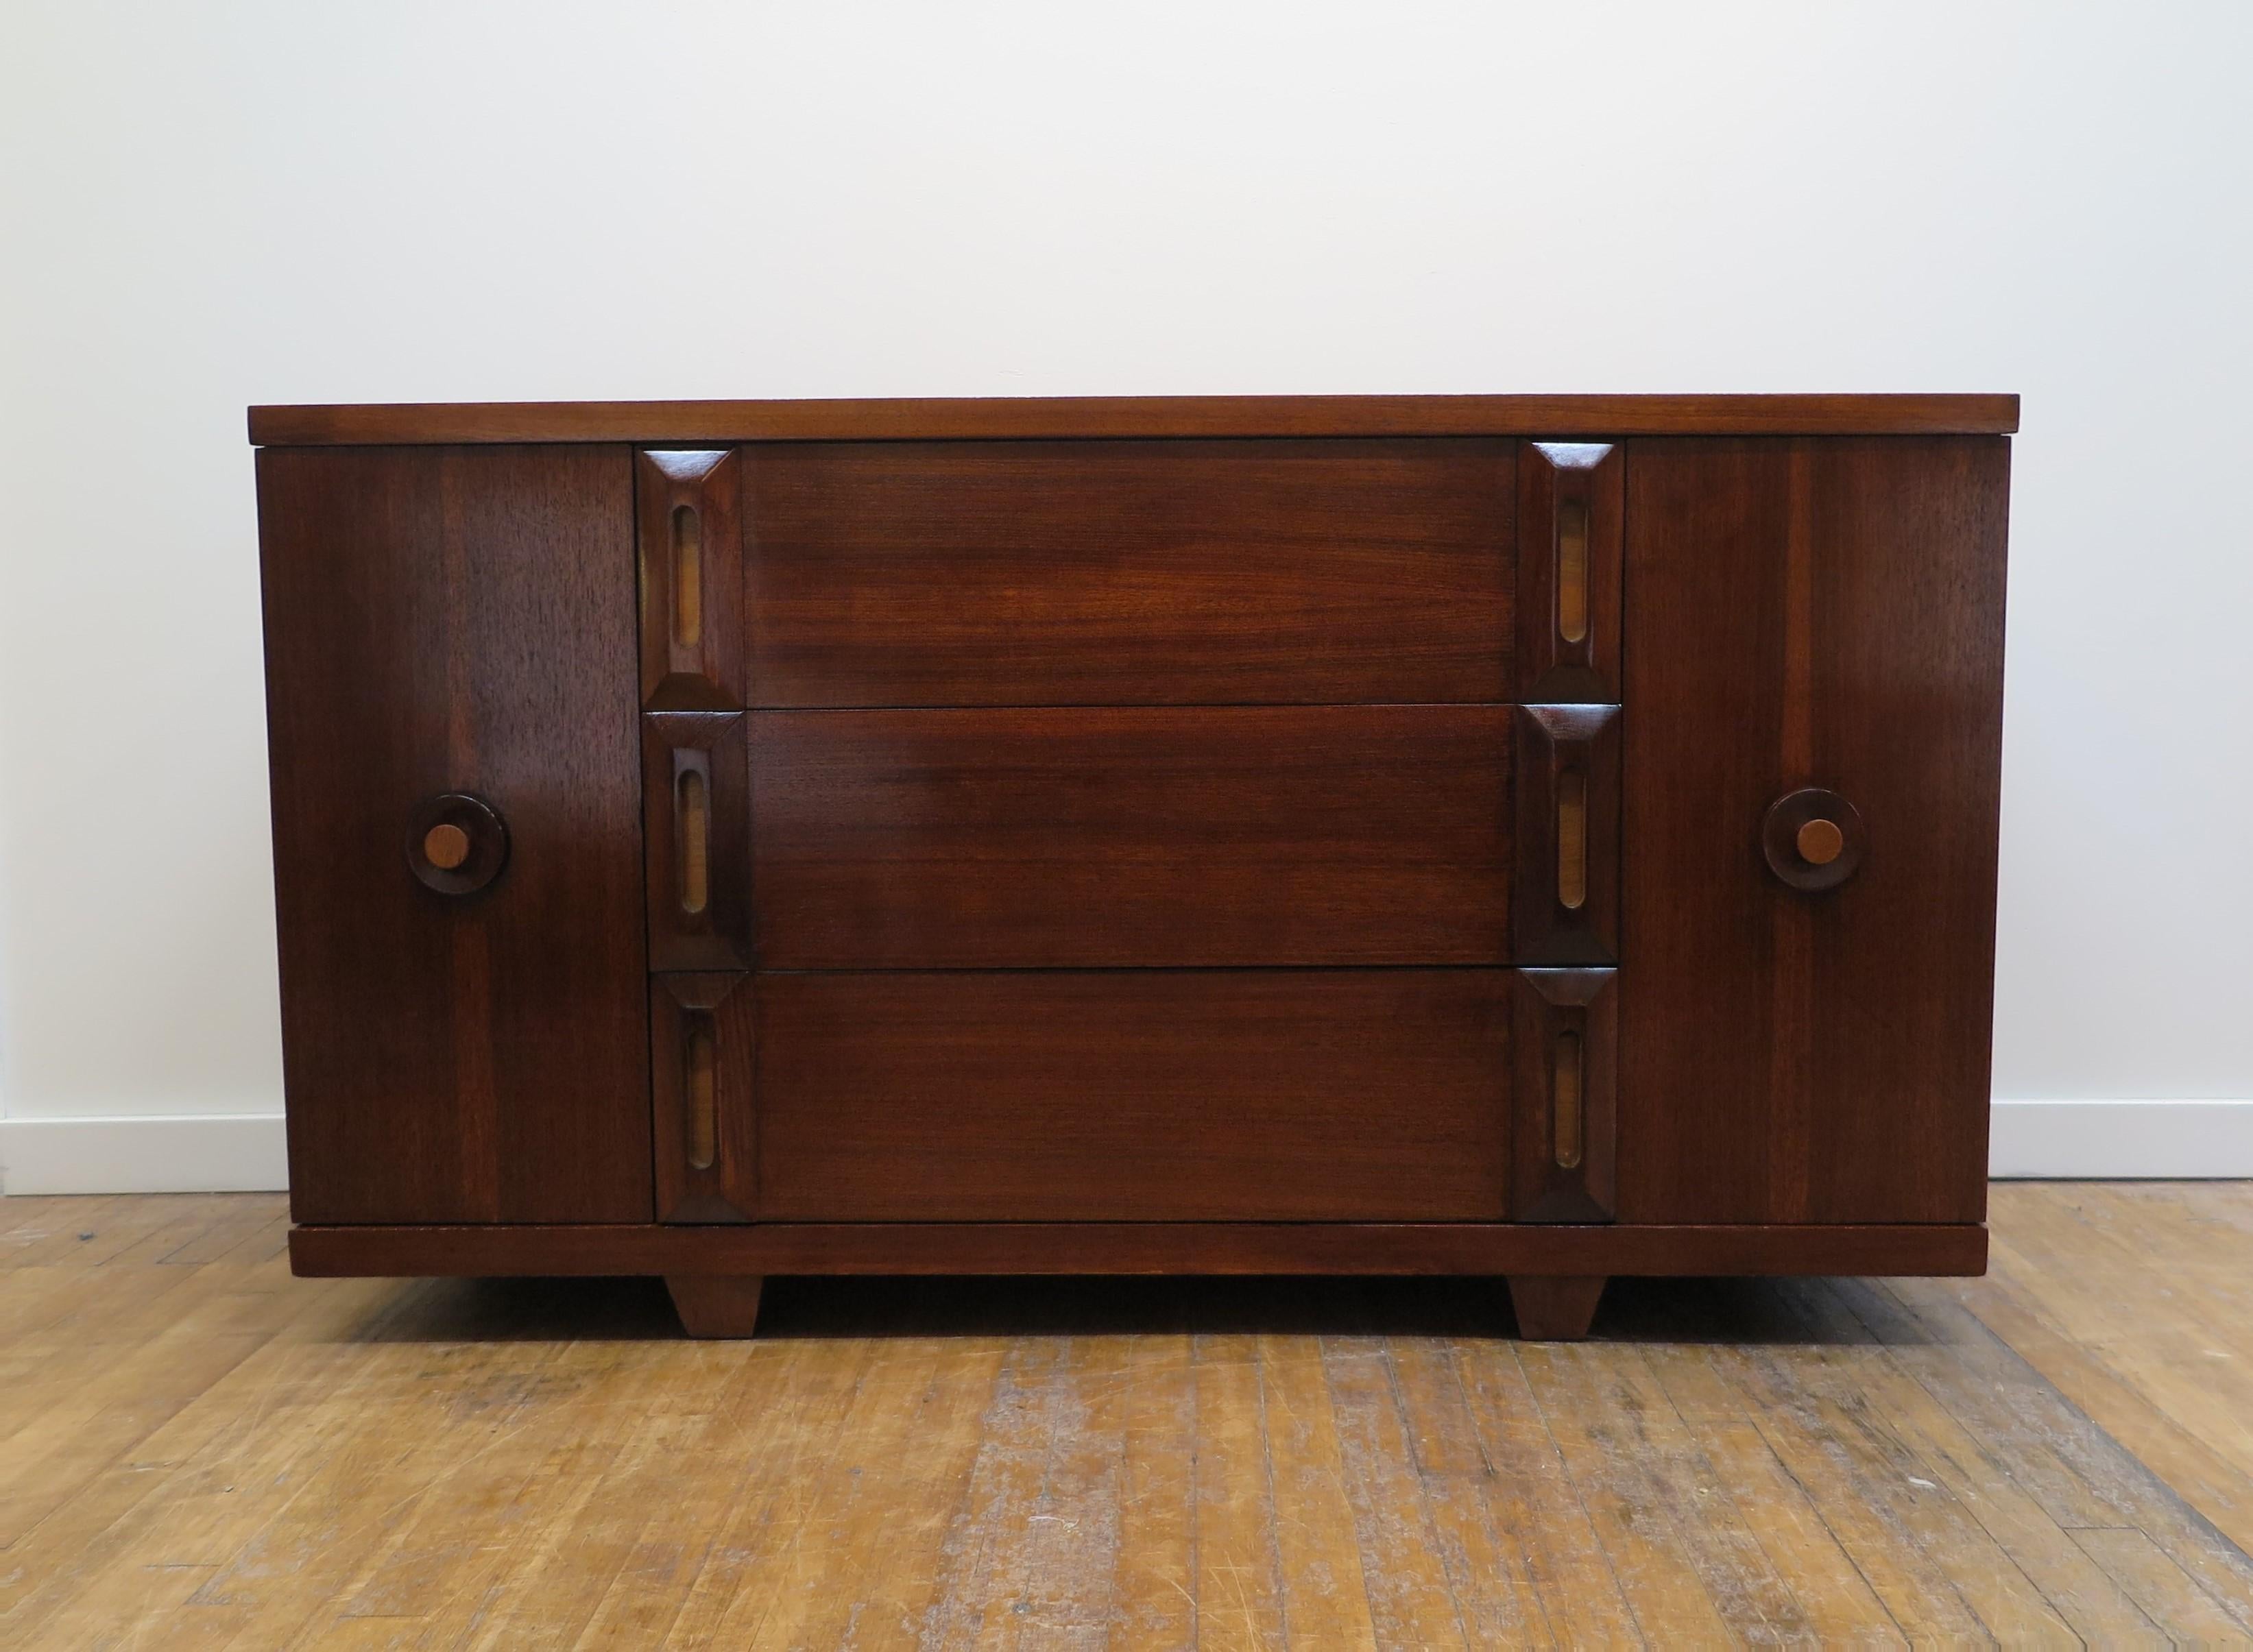 American Mid-Century Modern Credenza - Sideboard. An early 1950s American Mid-Century Modern Credenza - Sideboard that can also be used as a Dresser by American of Martinsville. Very nice piece in very good restored condition. This piece is of the